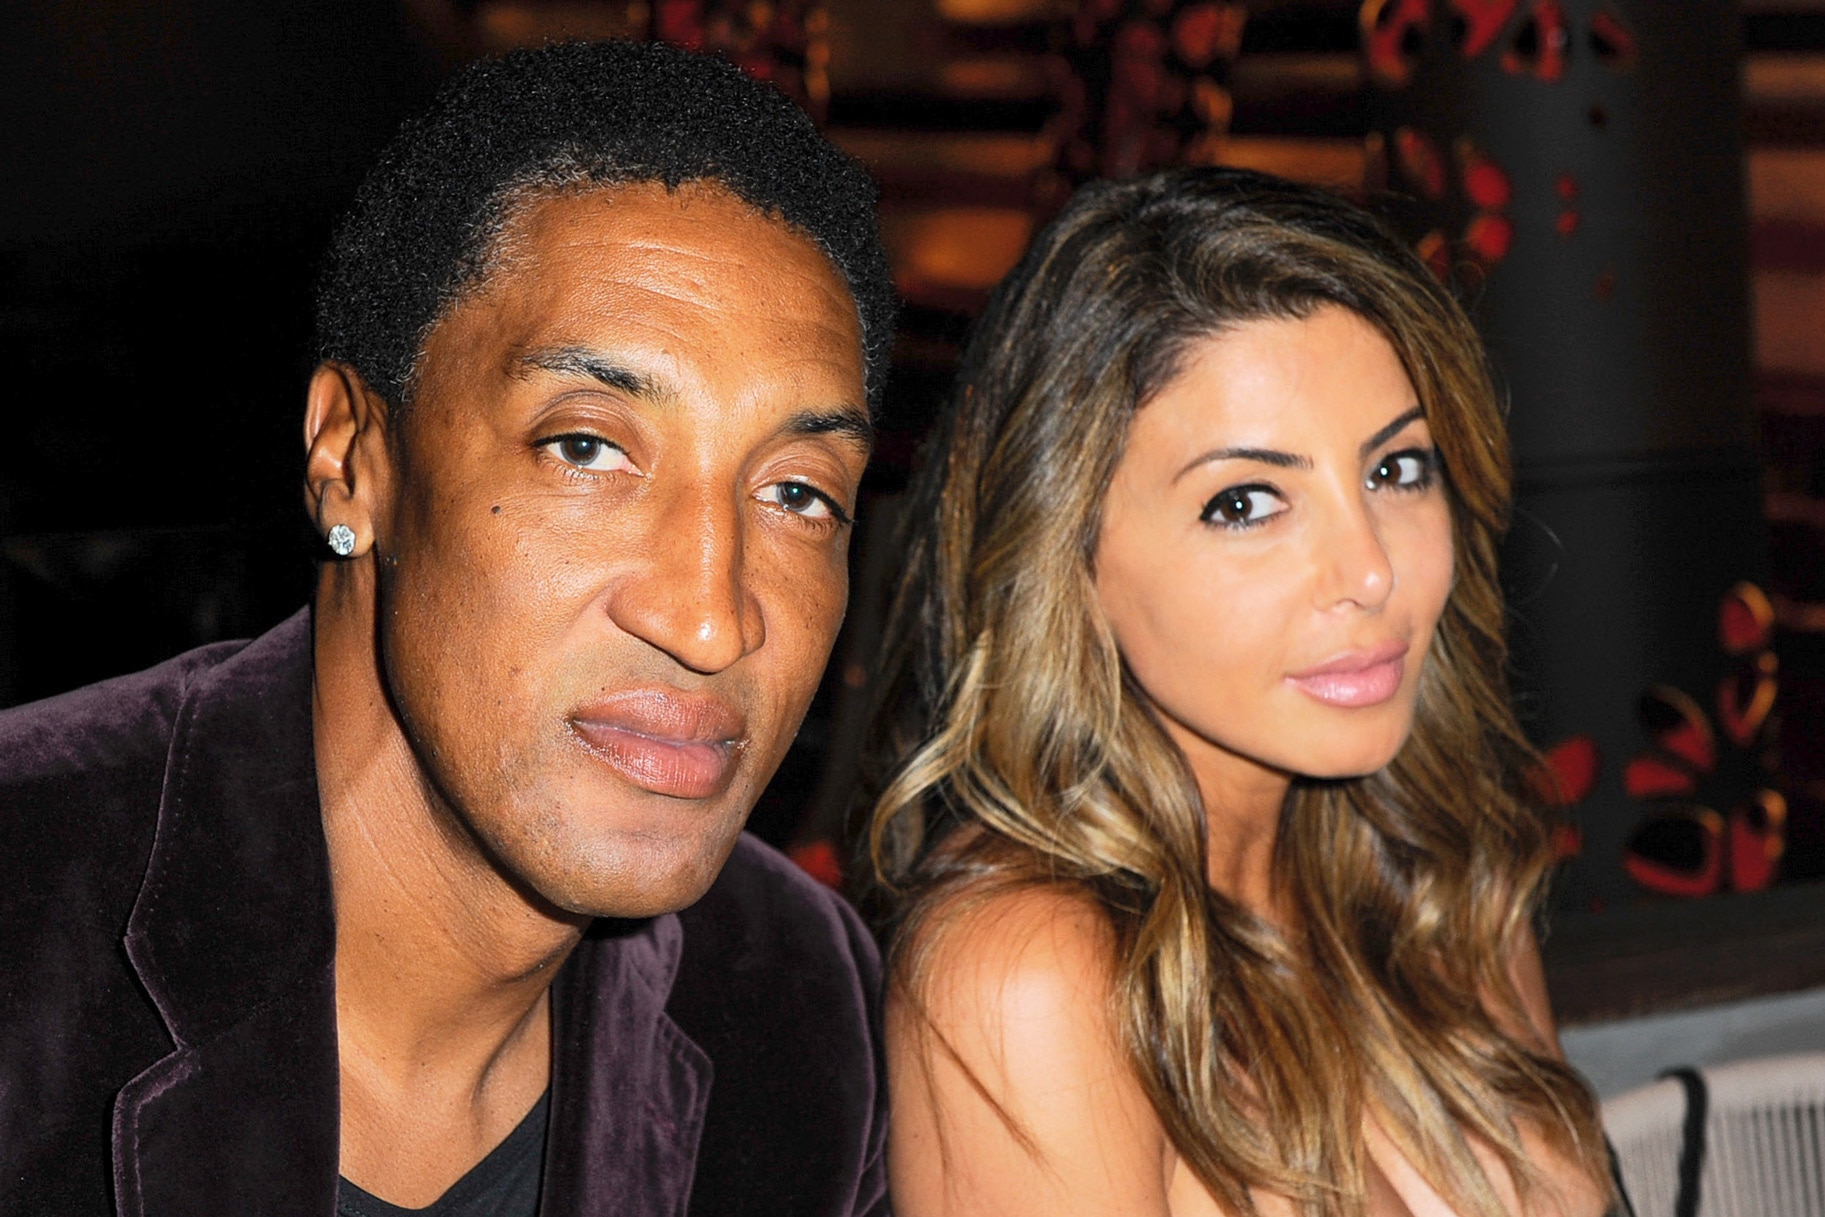 Last Dance': Larsa Pippen says she 'did everything' for Scottie